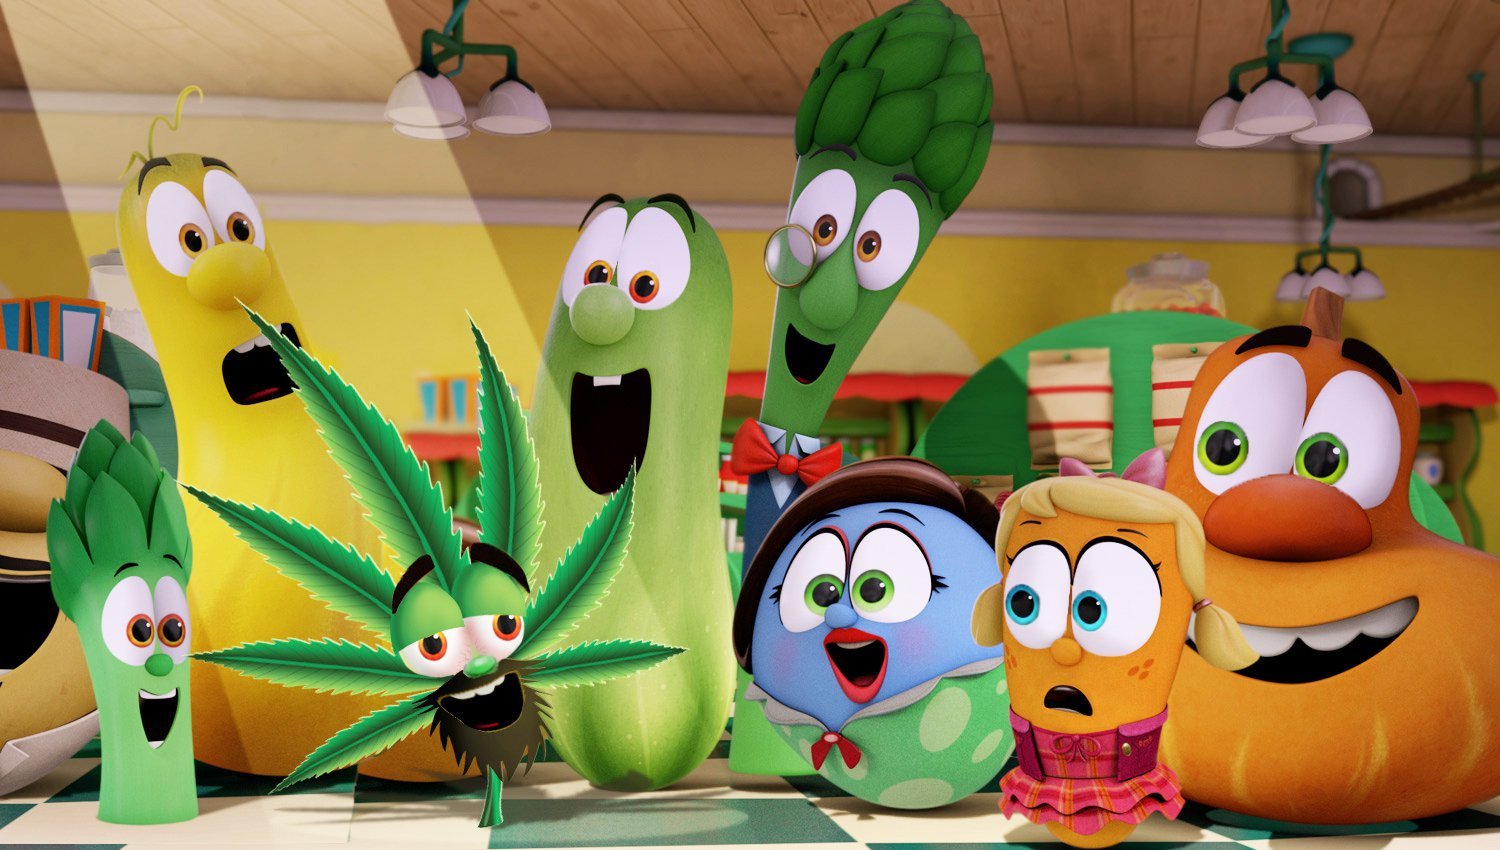 Fake Veggietales Cannabis Carl character announcement has folks on Facebook freaking out.